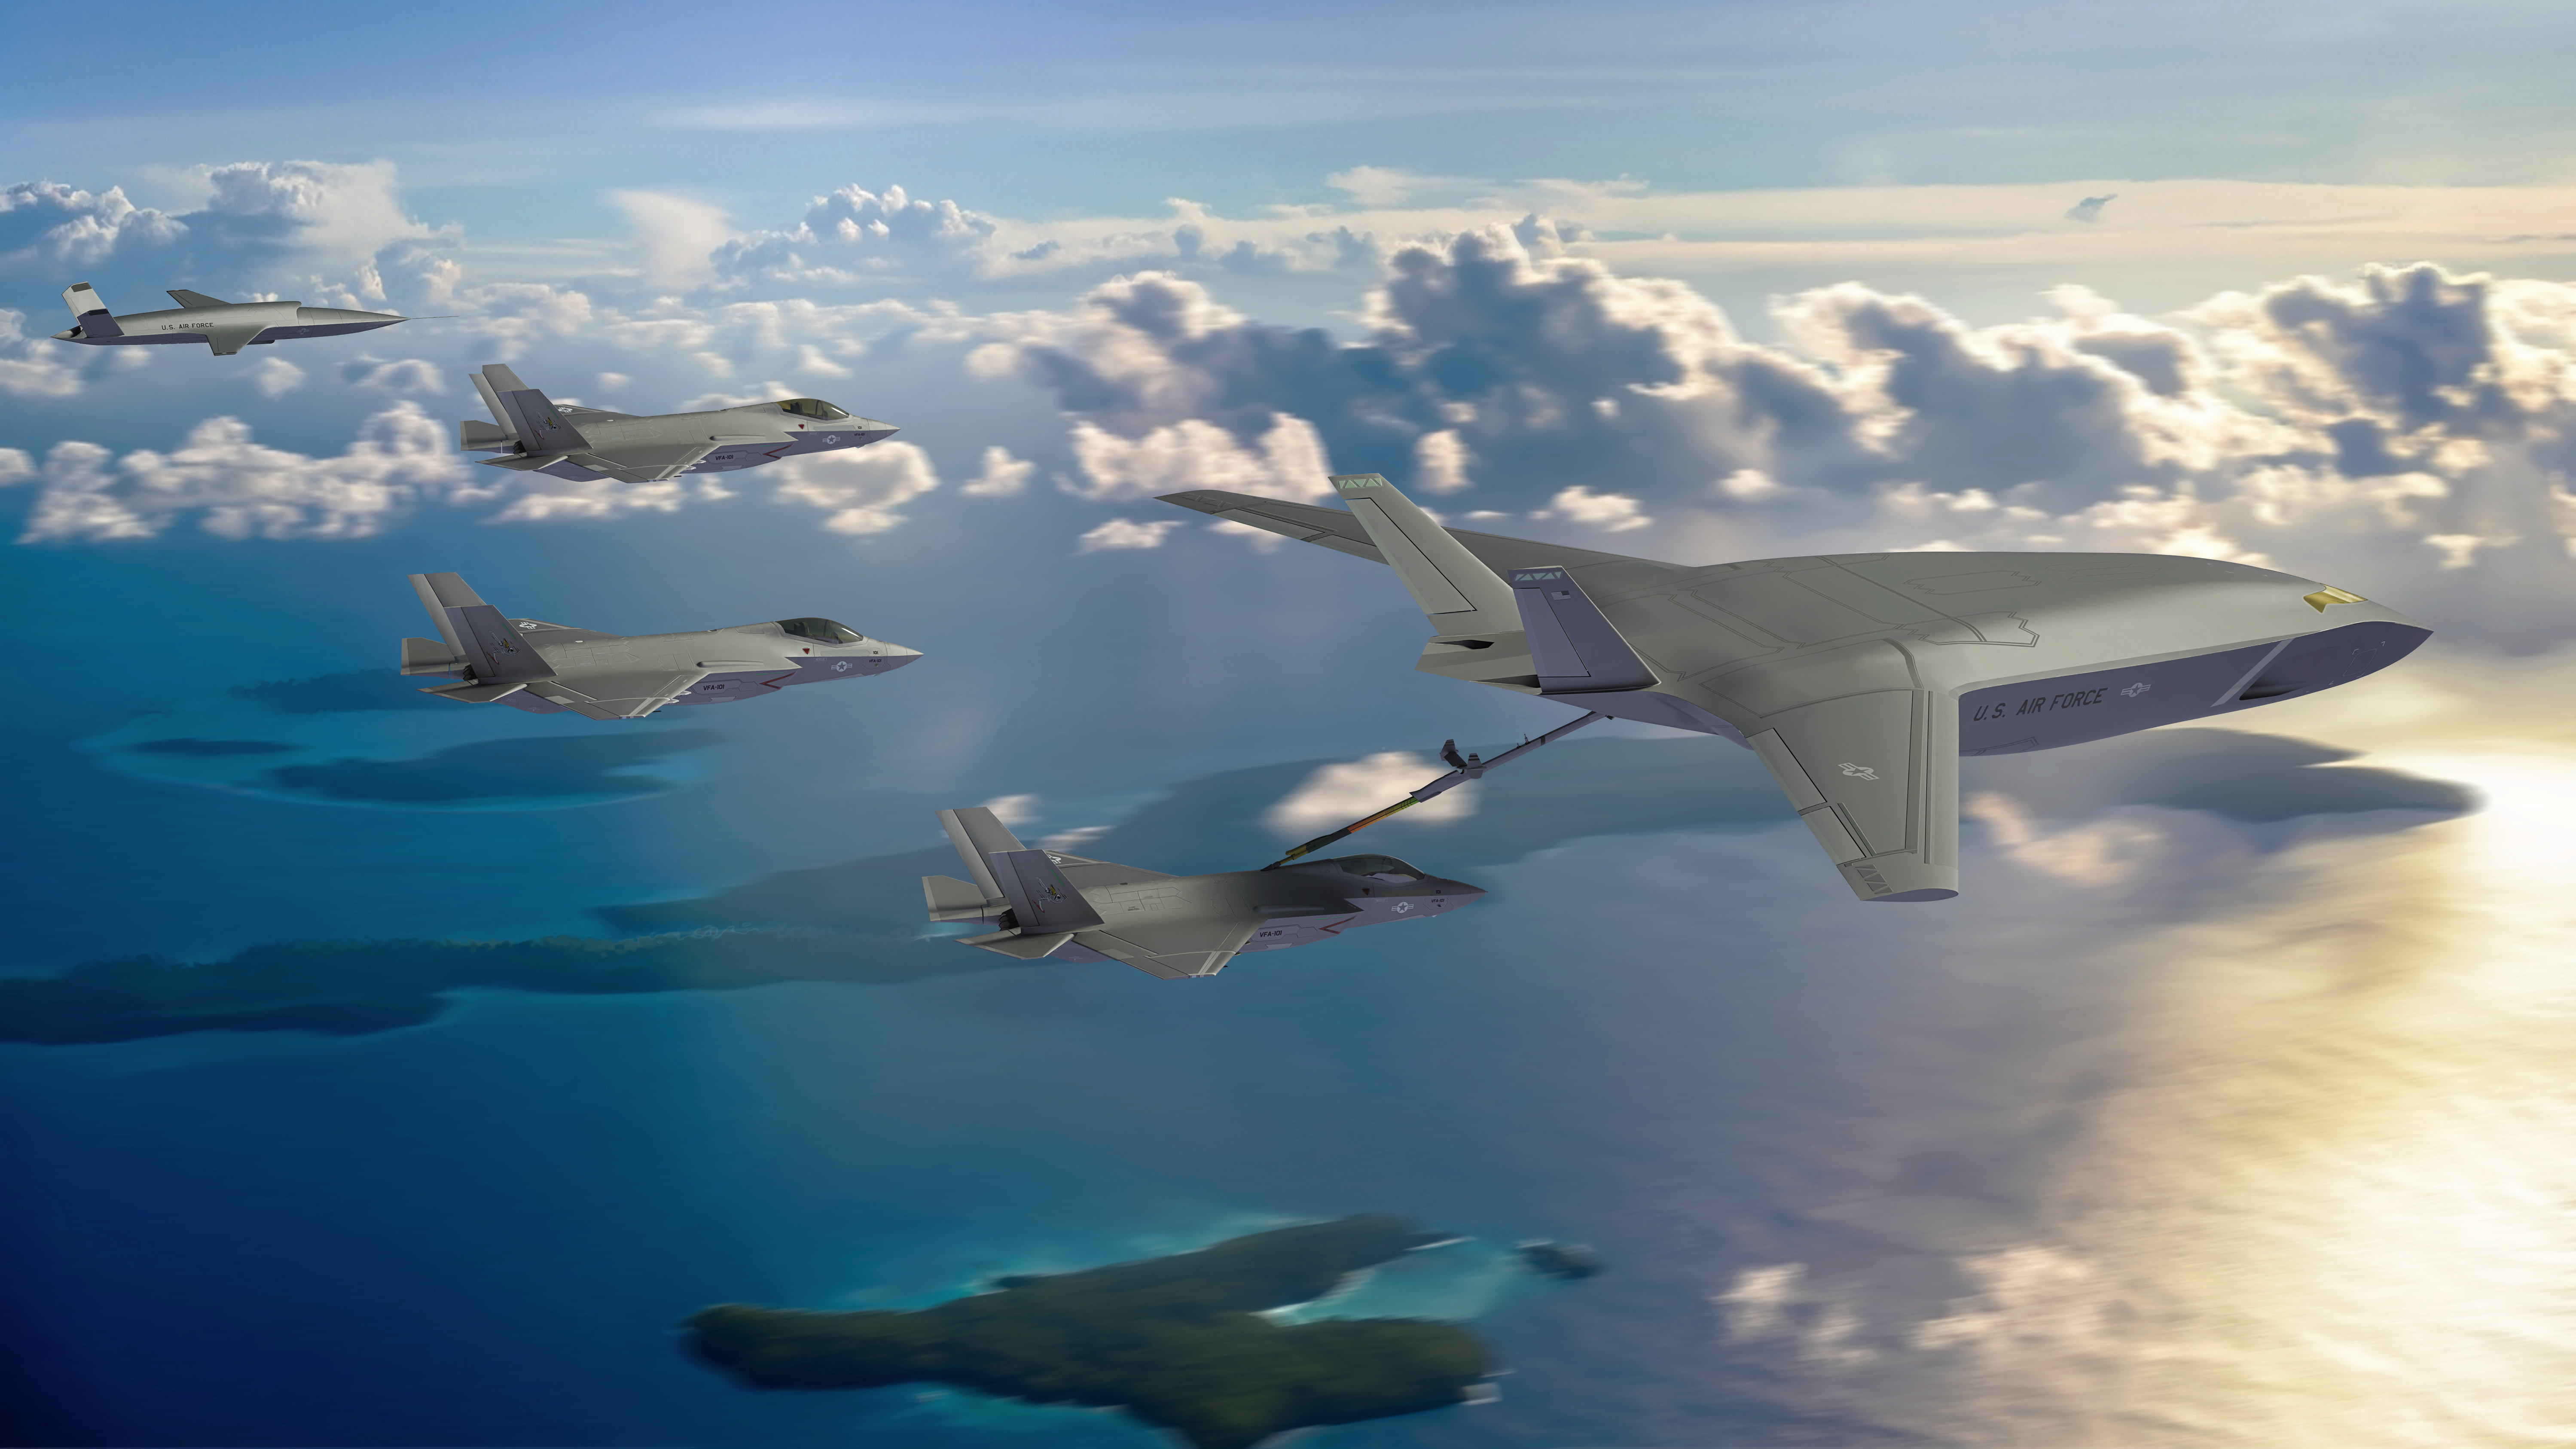 Natilus blended-wing-body aerial refueling